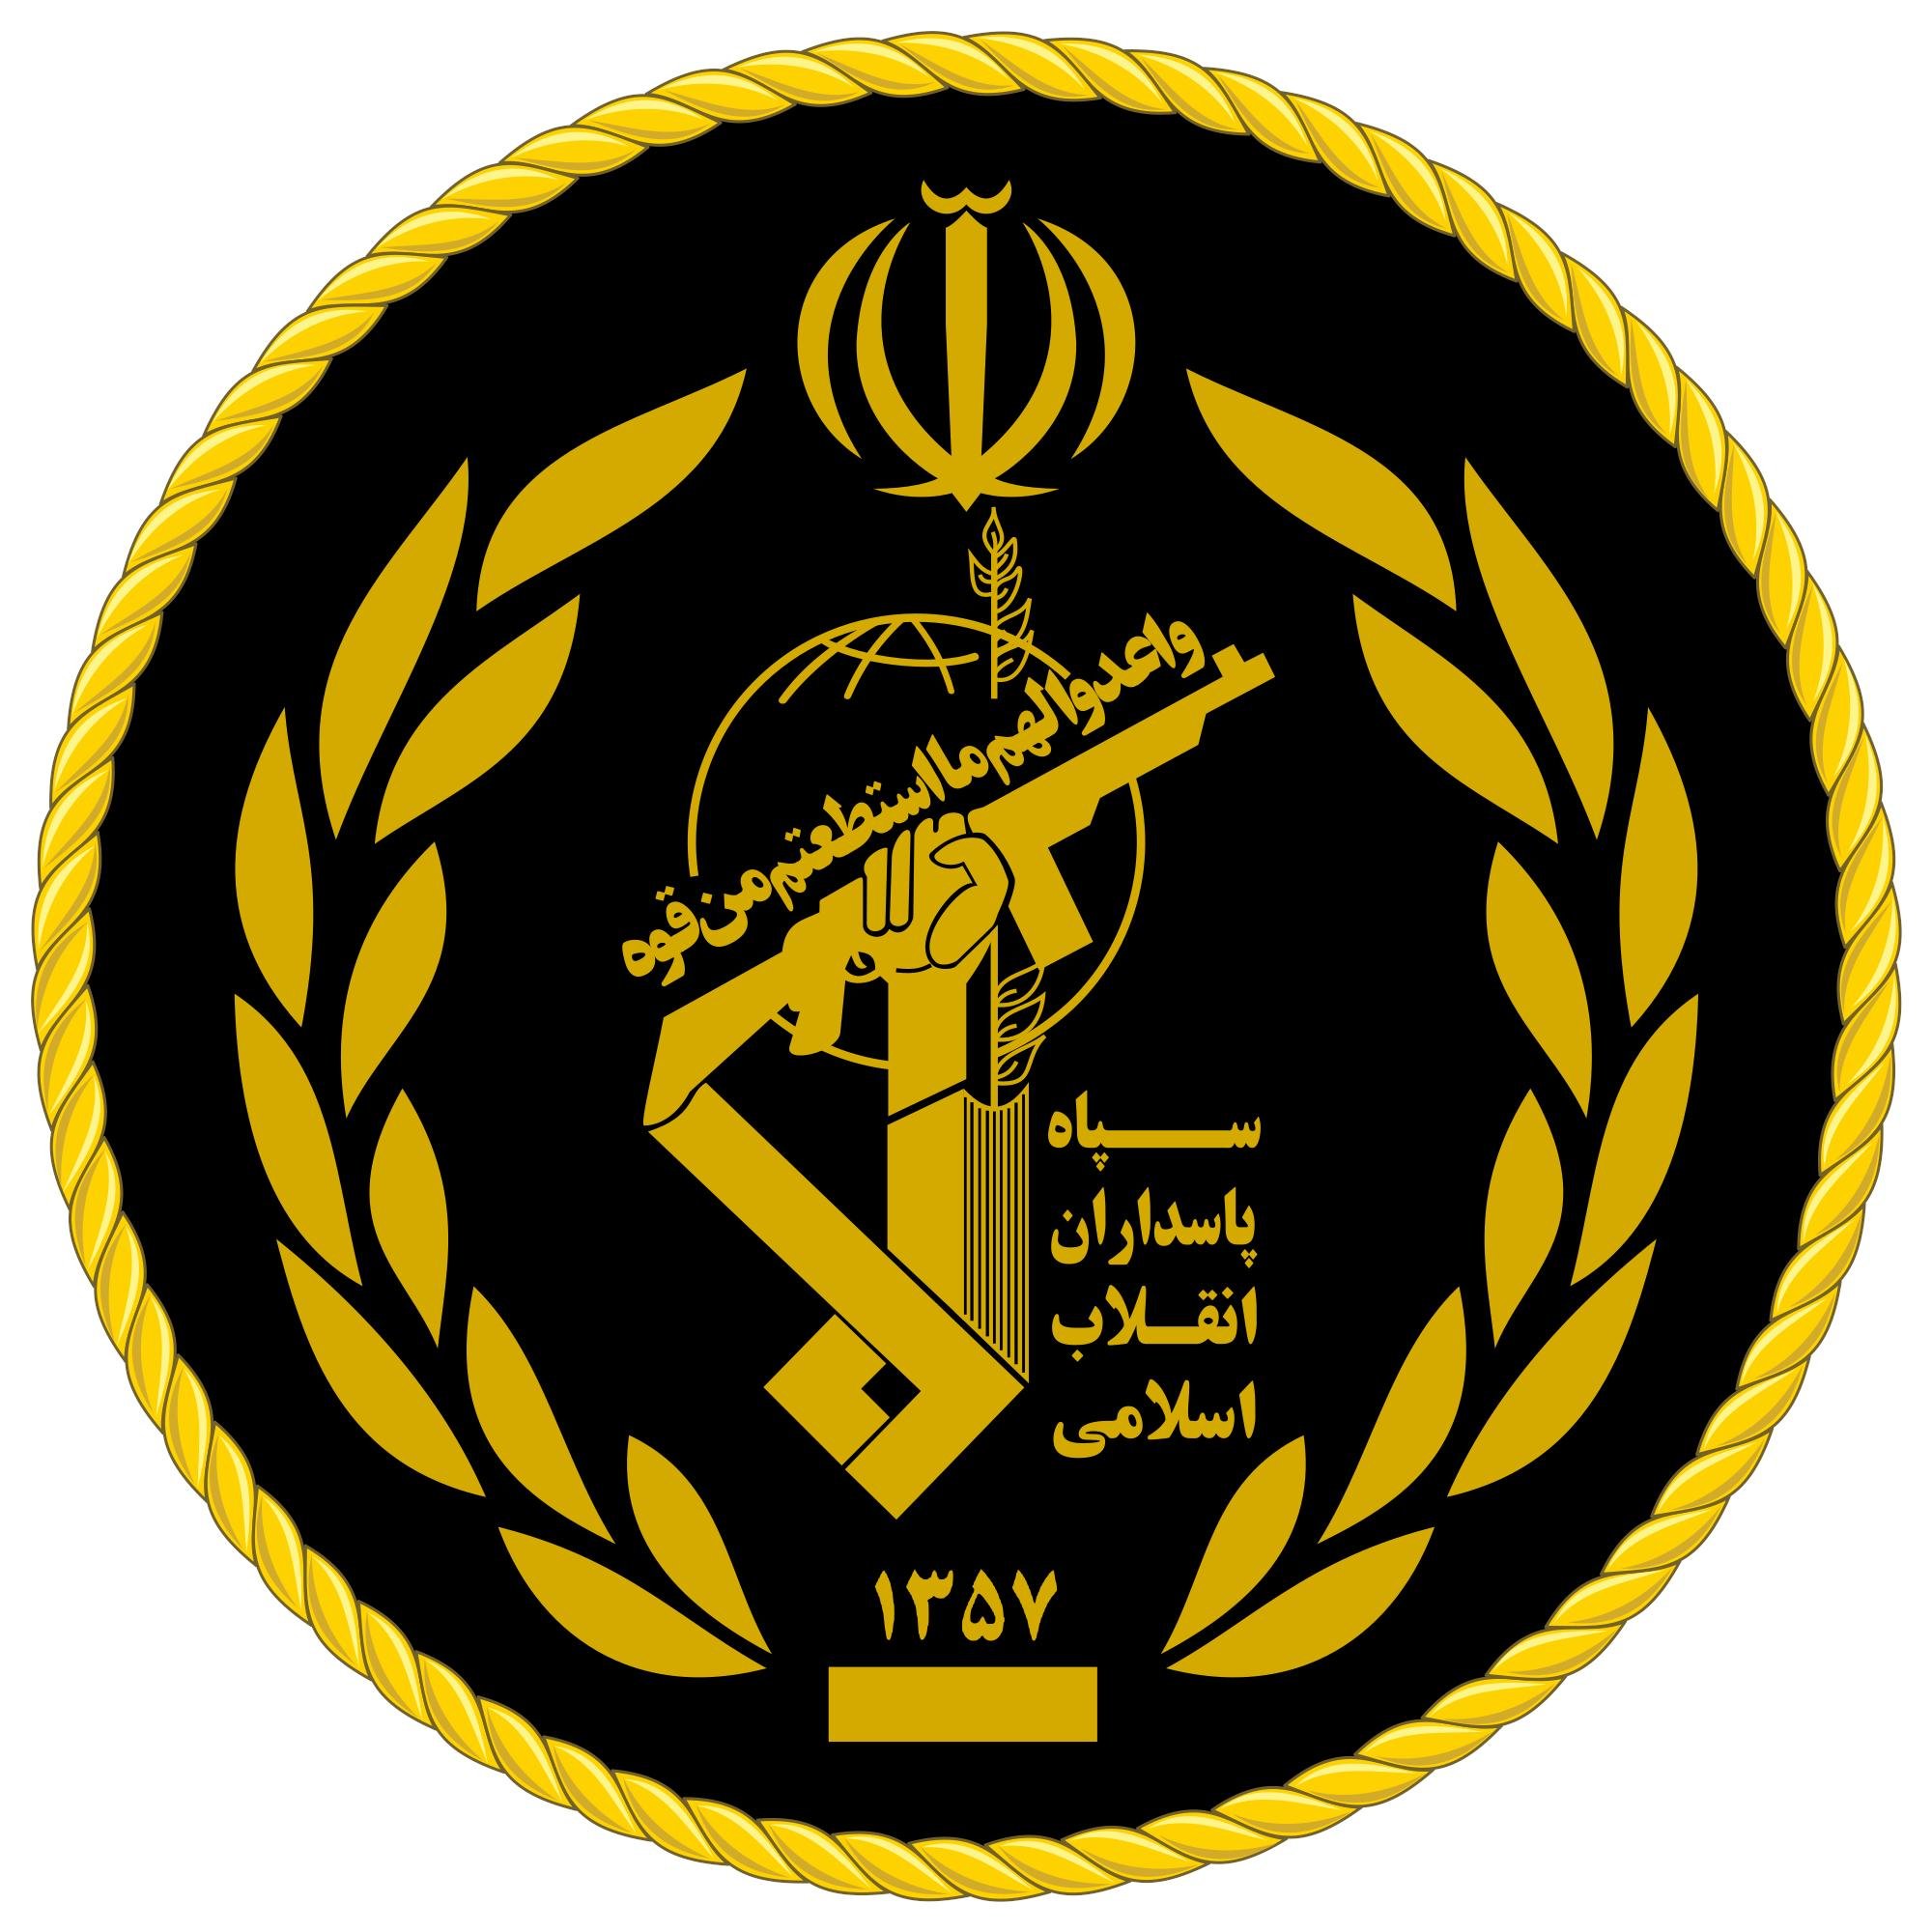 the pseudo-official twitter account of Islamic Revolutionary Guard Corps.